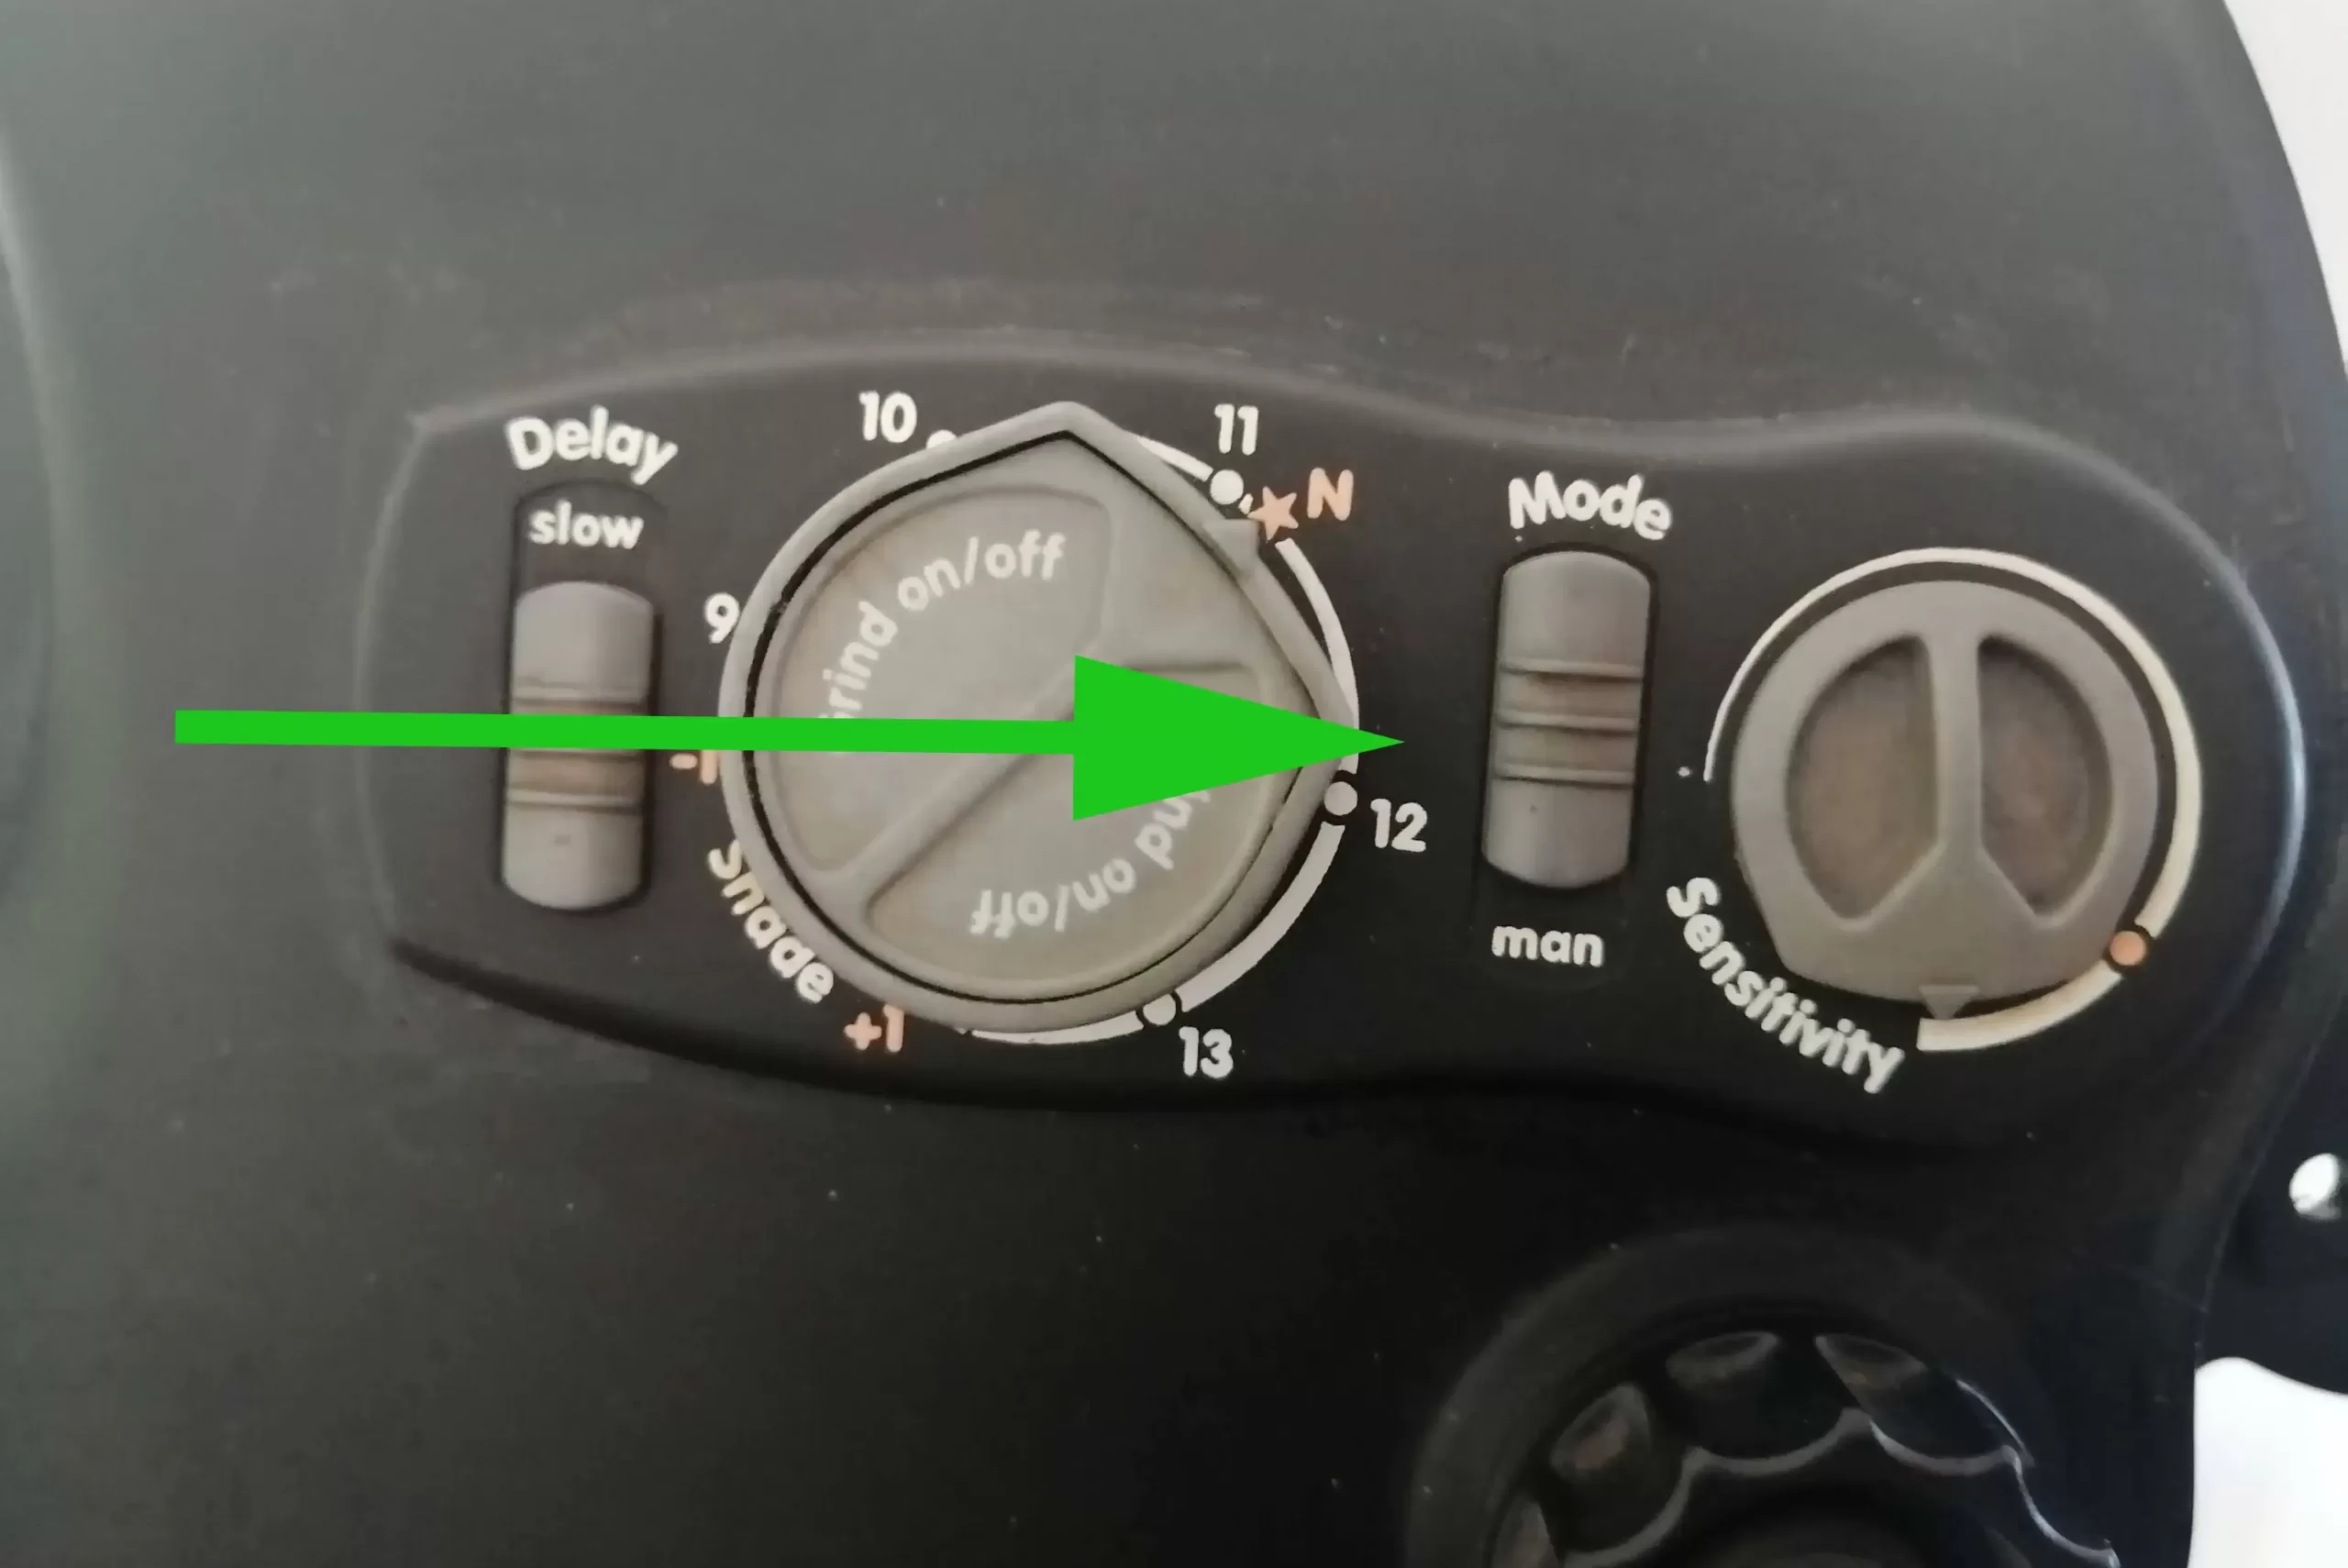 Arrow is pointing to the switch for variable or manual options on a welding helmet.